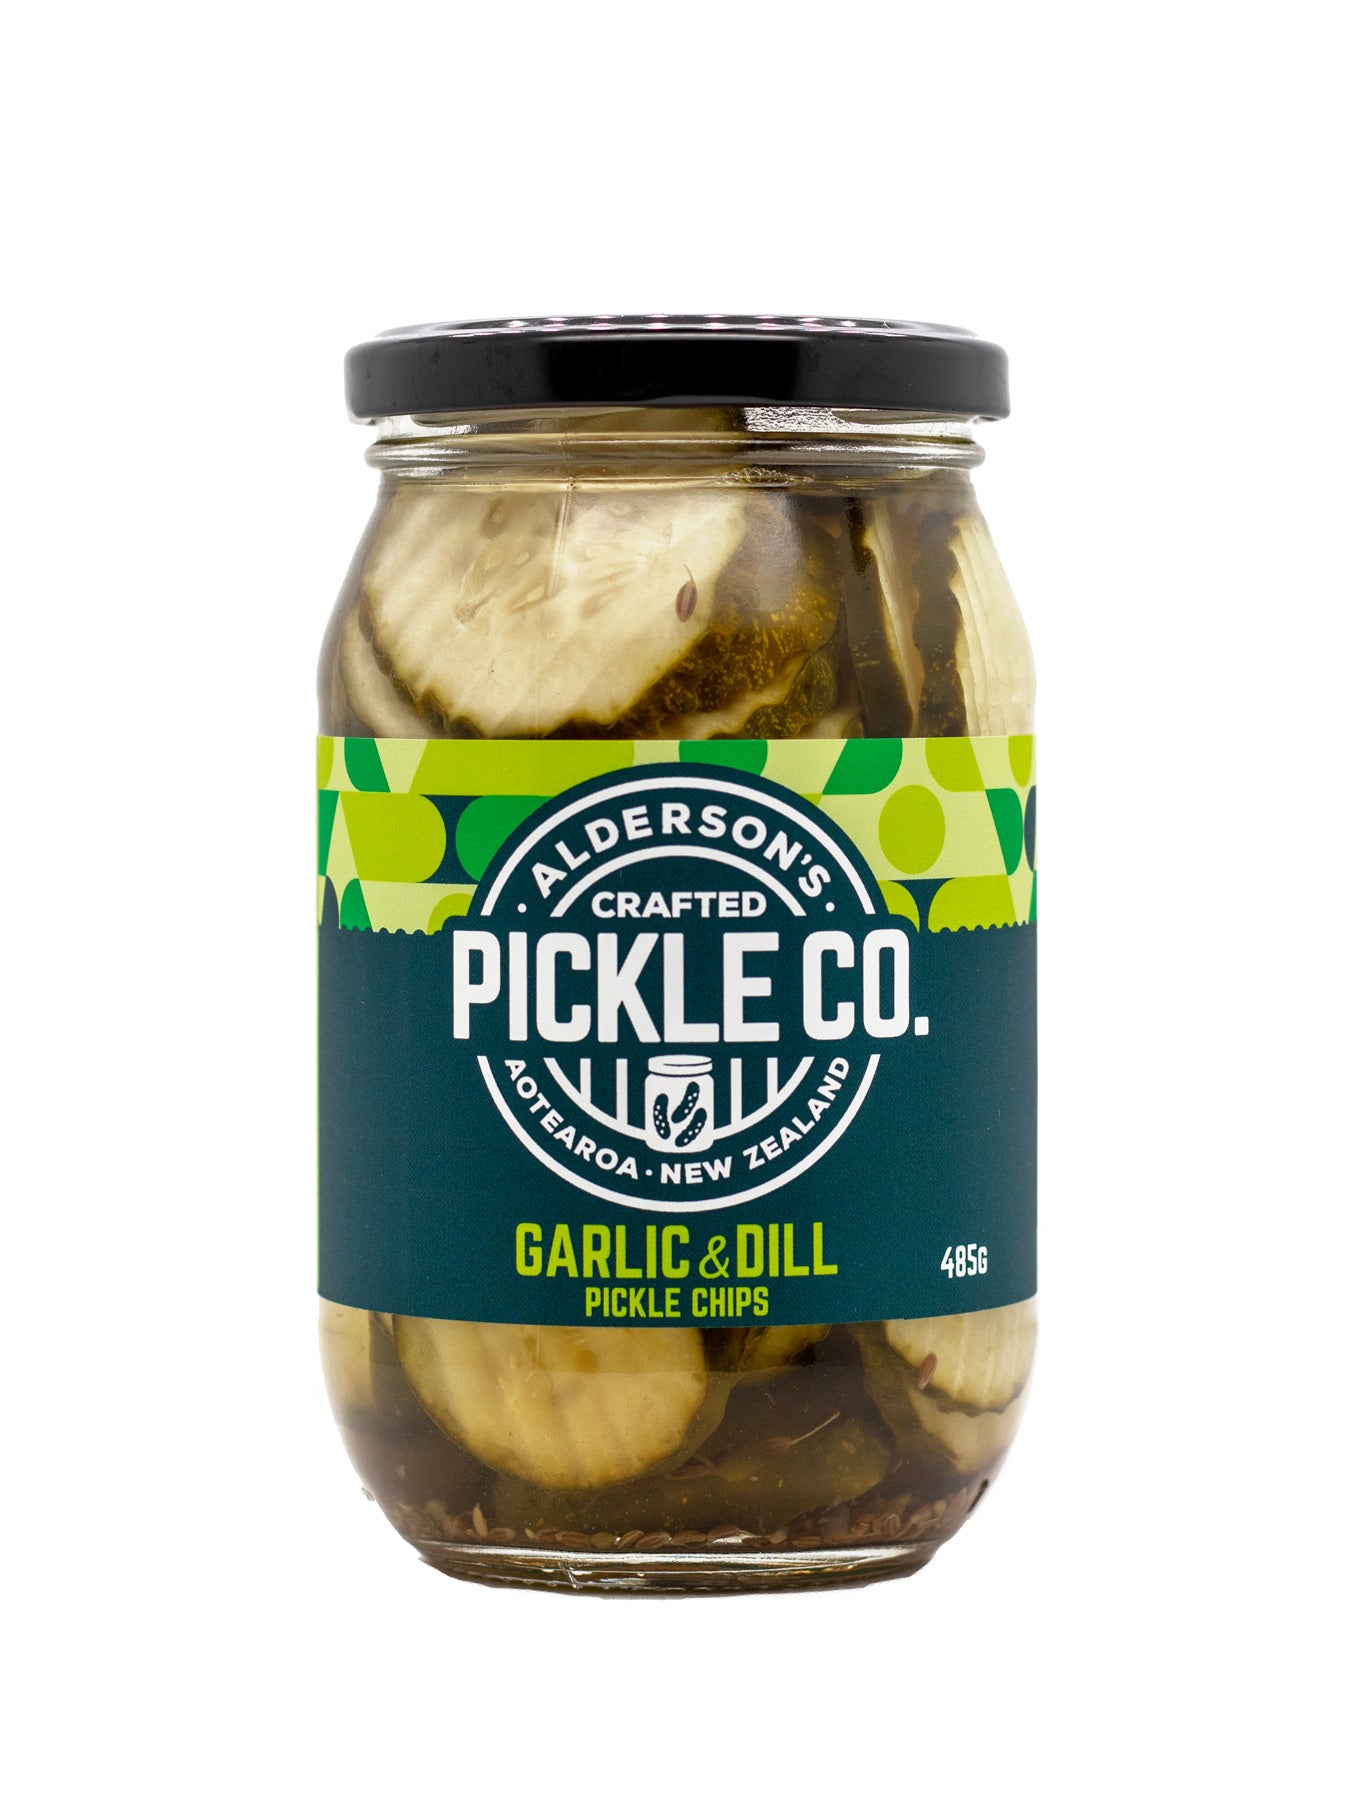 Garlic & Dill Pickle Chips